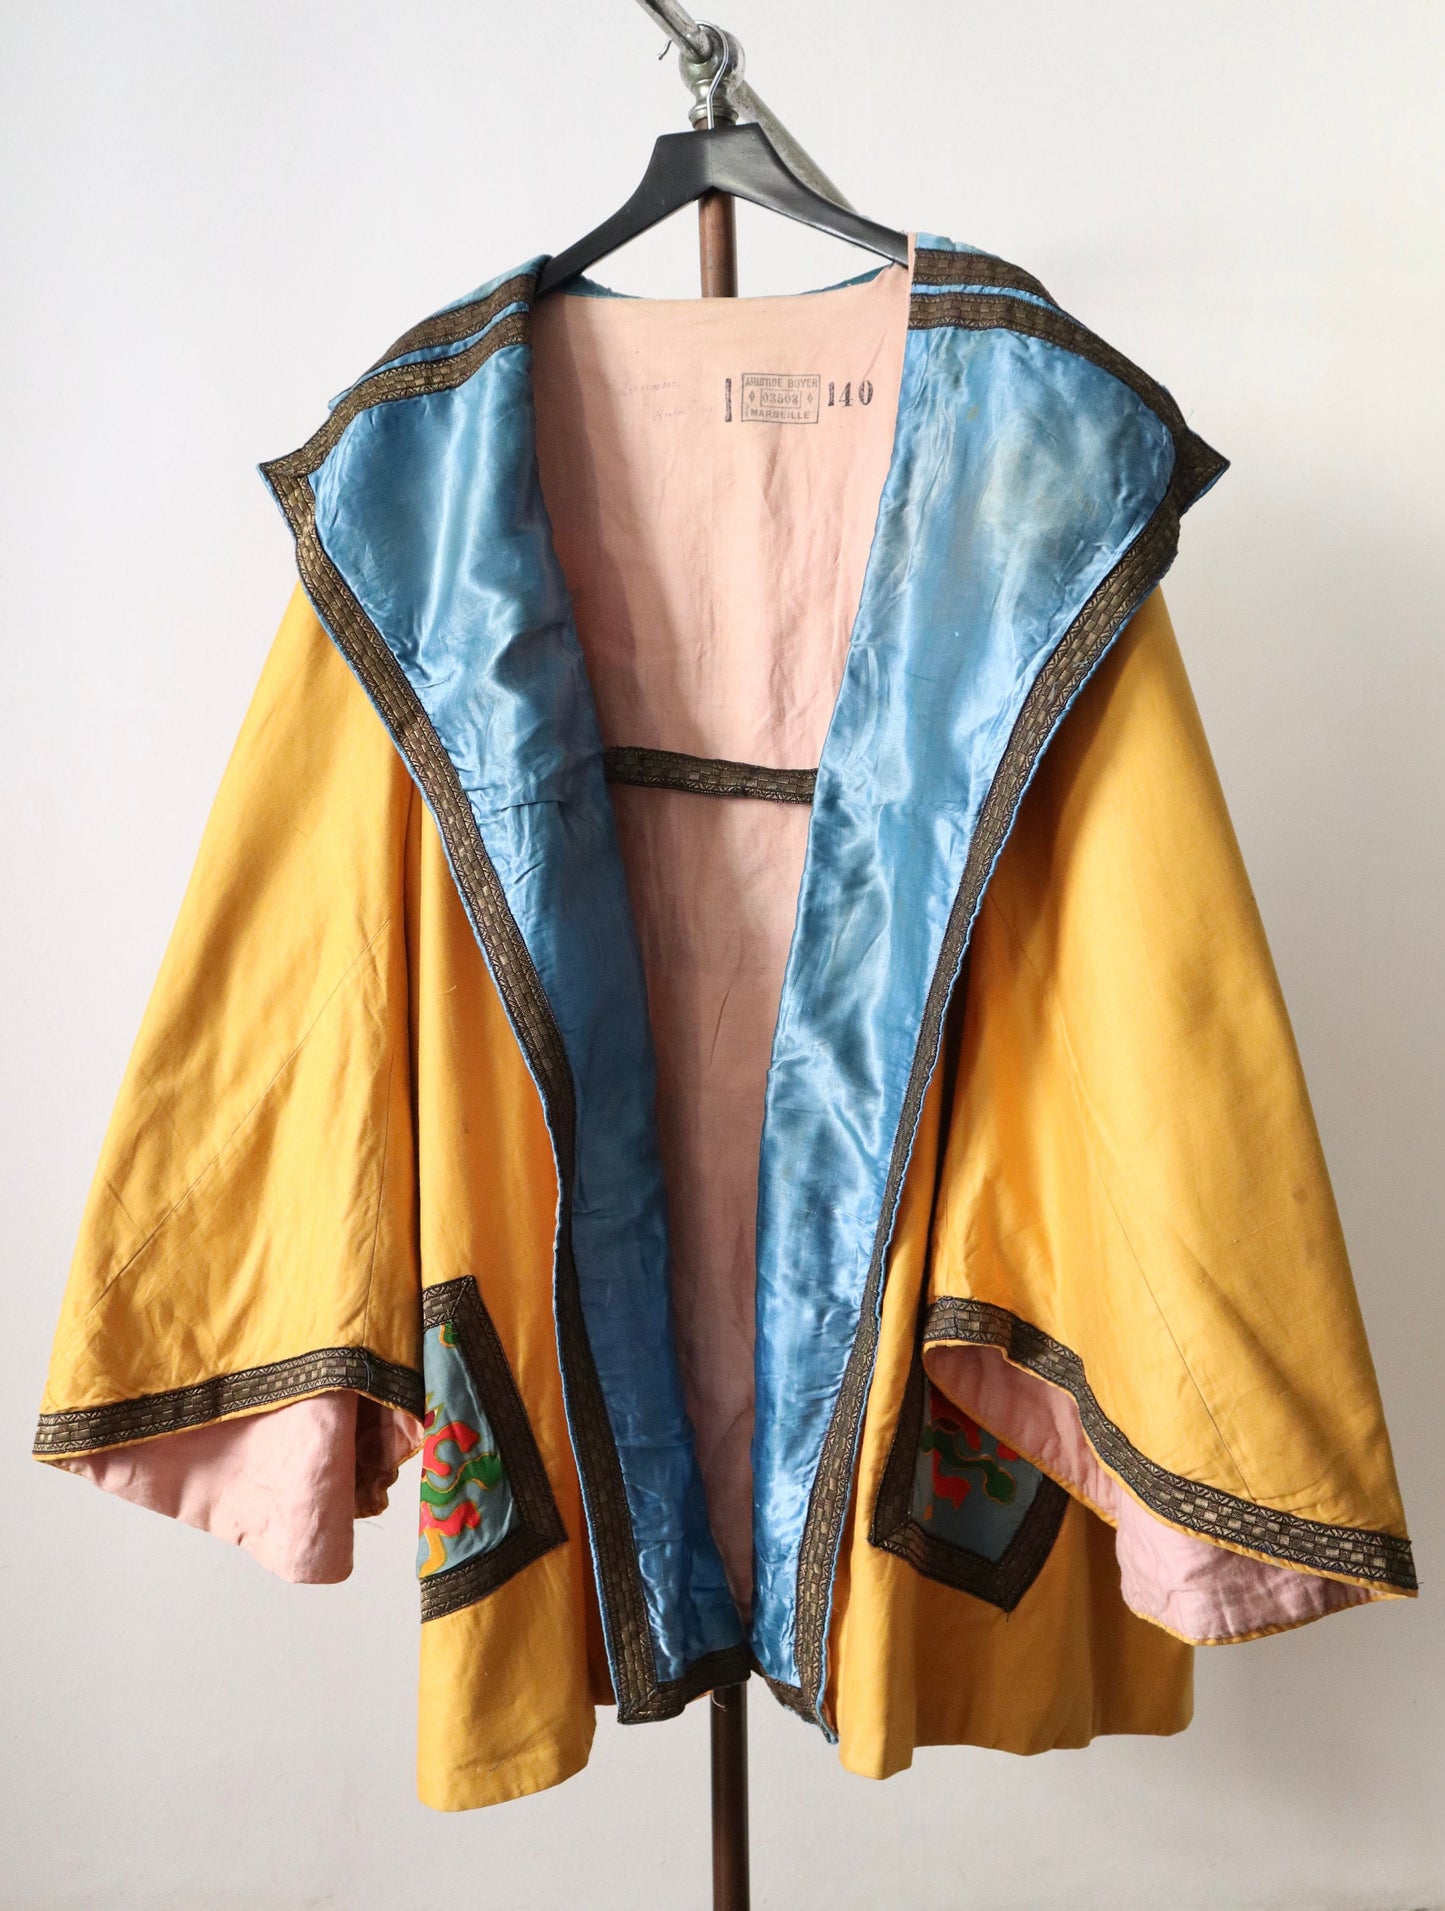 1920s French Theatre Opera Costume Jacket Oriental Style Wide Sleeves Gold Metal Ribbon Trim Yellow Blue